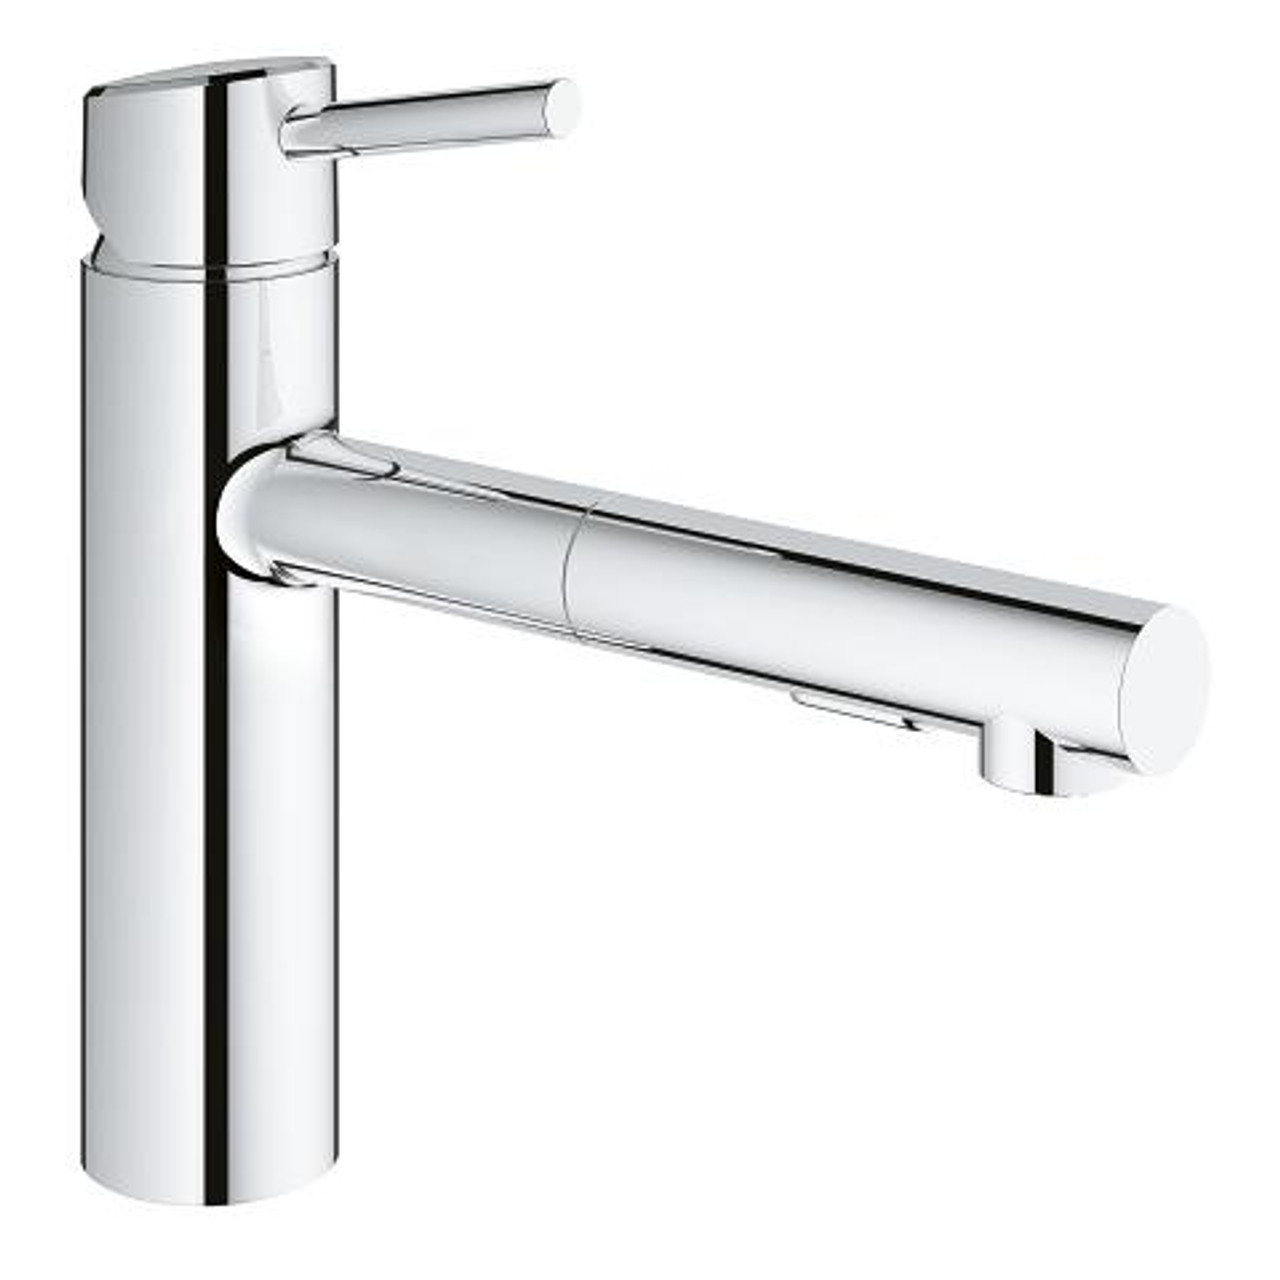 Grohe Concetto Single Handle Kitchen Faucet Chrome Finish York Taps